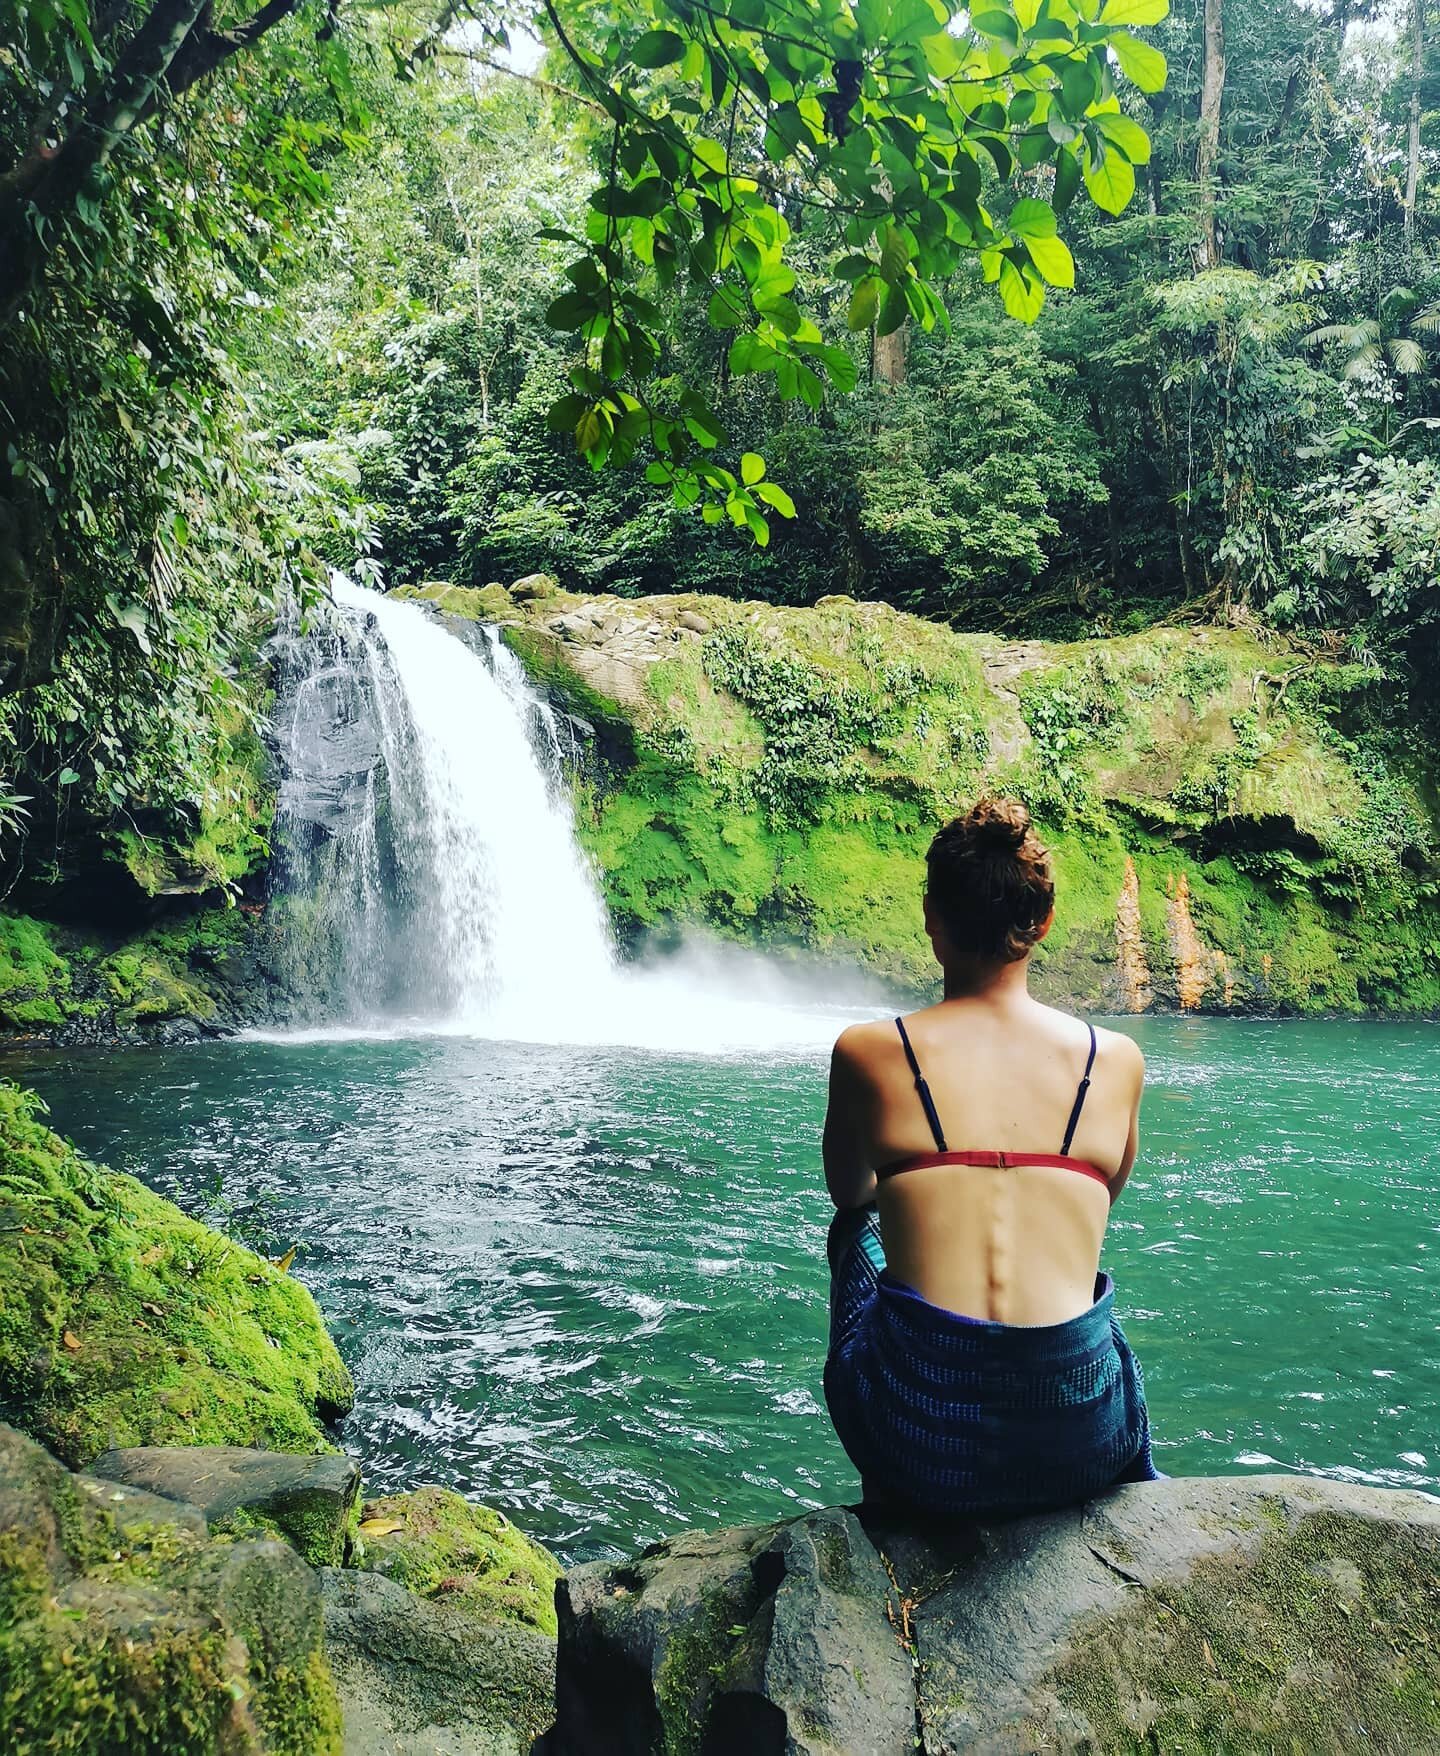 We're so blessed to be surrounded by beautiful, natural places!

On the Sarapiqui River you are spoilt for choice for what to do. Hikes, waterfalls, rafting, kayaking, ziplining, horse riding, emerse yourself on local tours, the list is endless! Get 